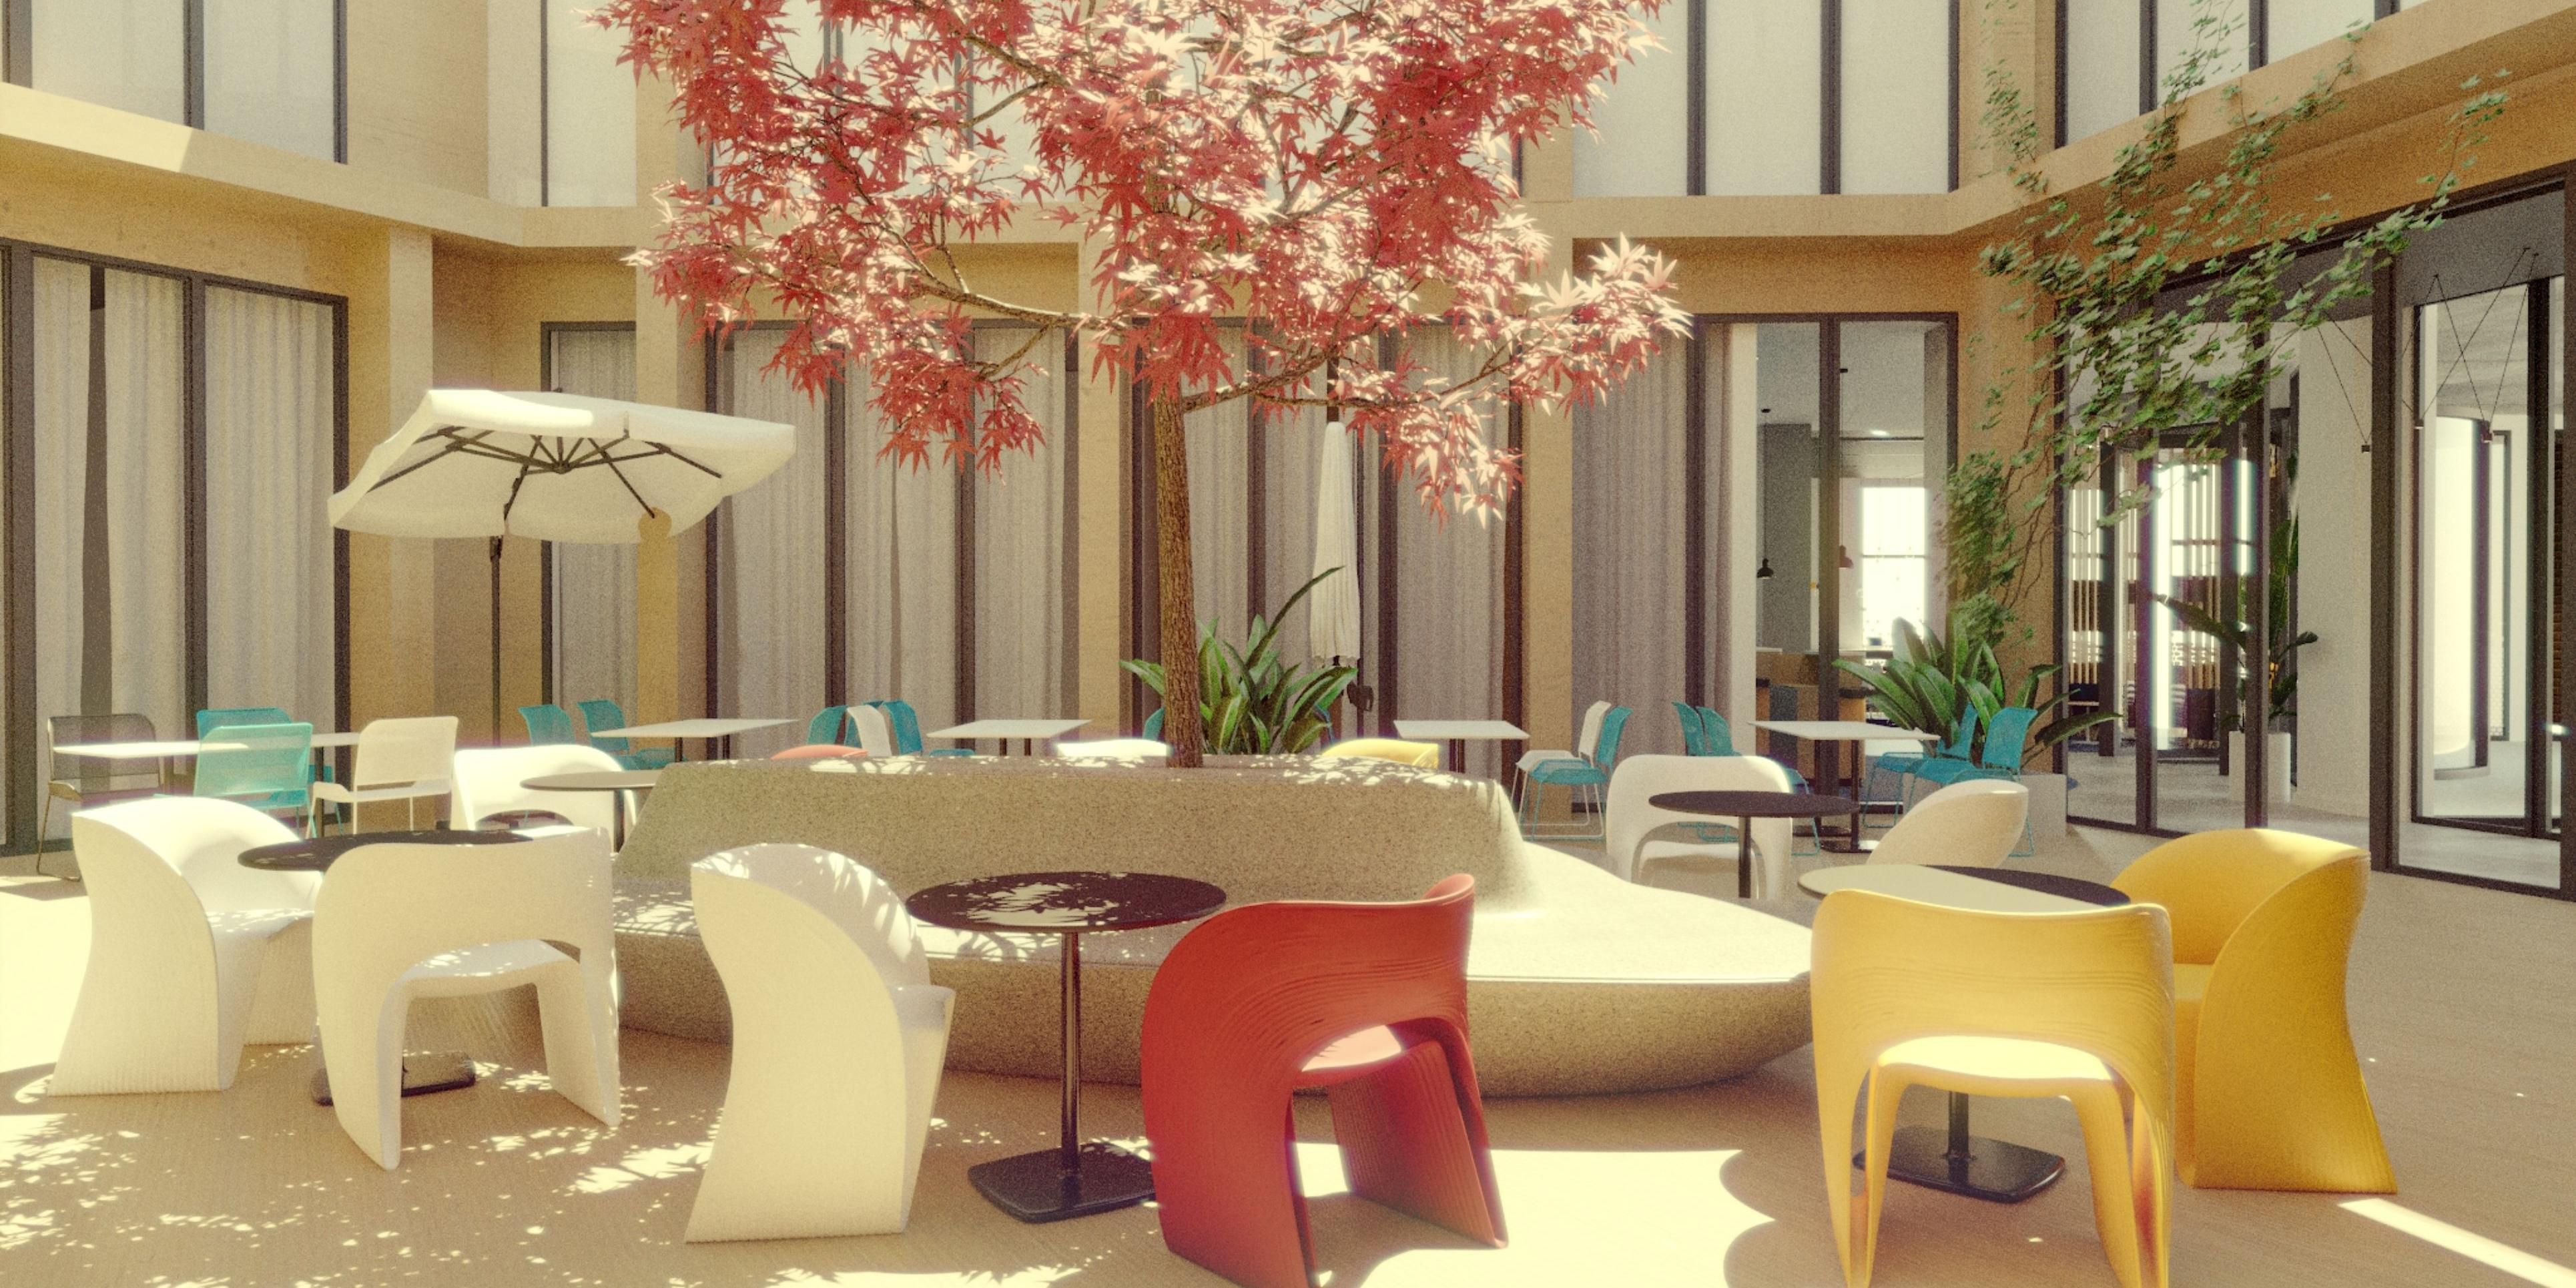 Our unique courtyard, designed in an elegant and sophisticated way, offers the guests of Holiday Inn Express Tbilisi Avlabari a welcoming and cozy atmosphere. This is a great place to take a short break and recharge on a busy day.